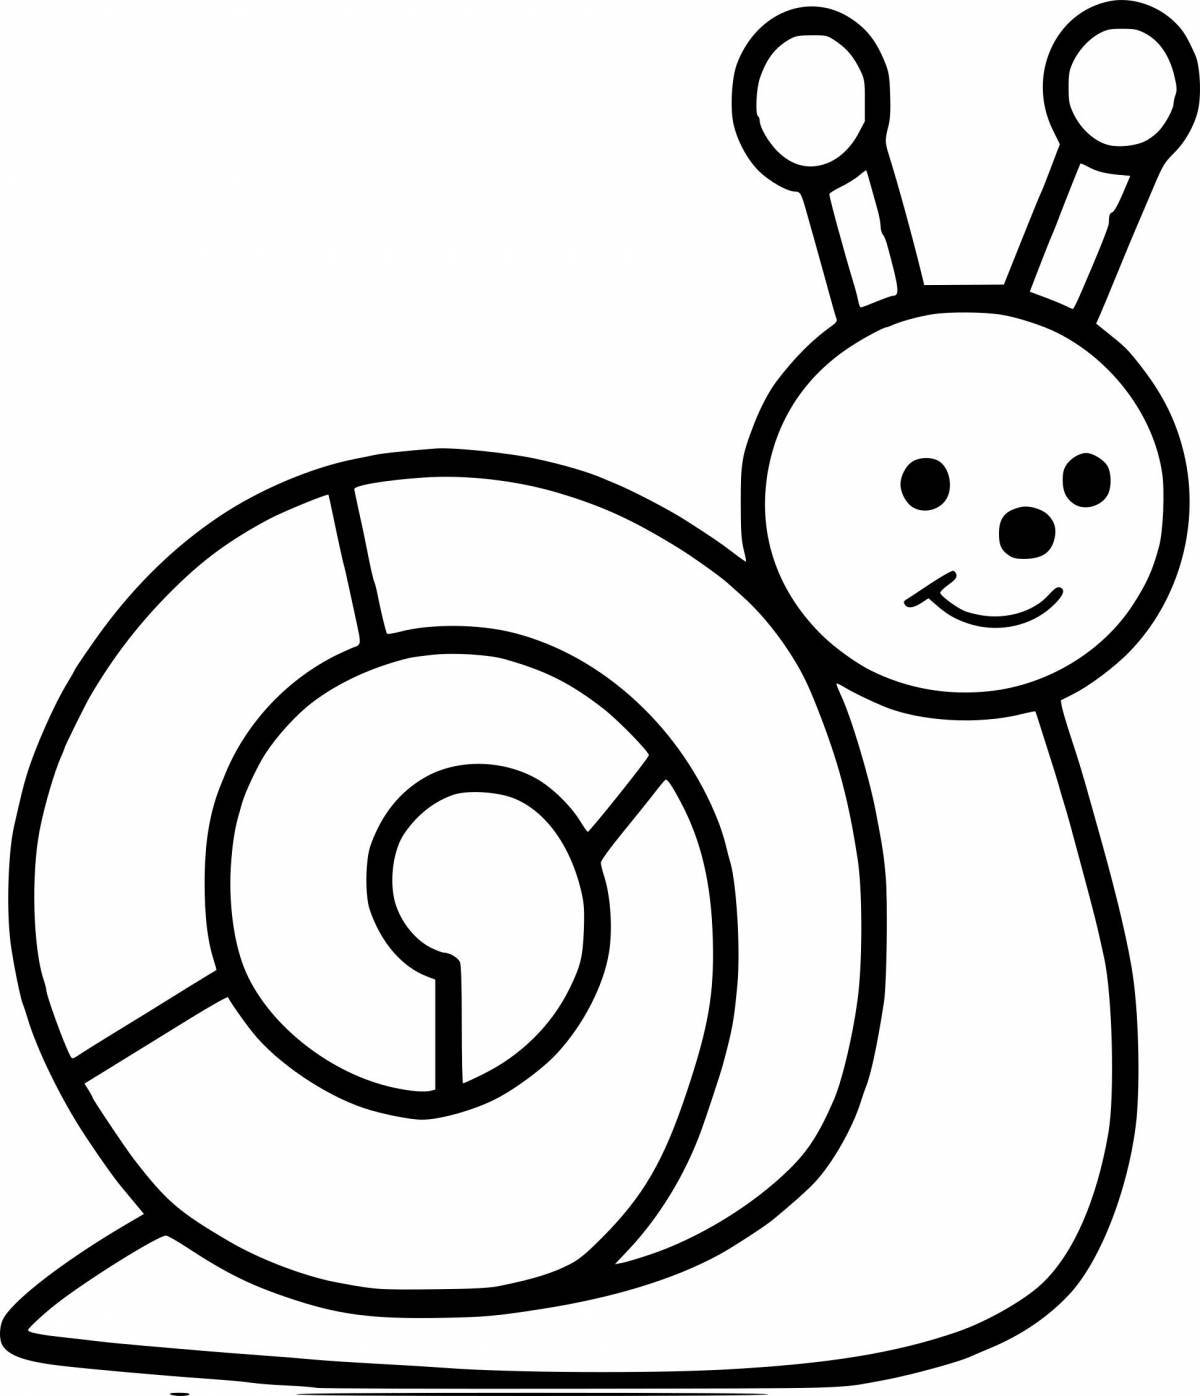 Fabulous snail coloring page for kids